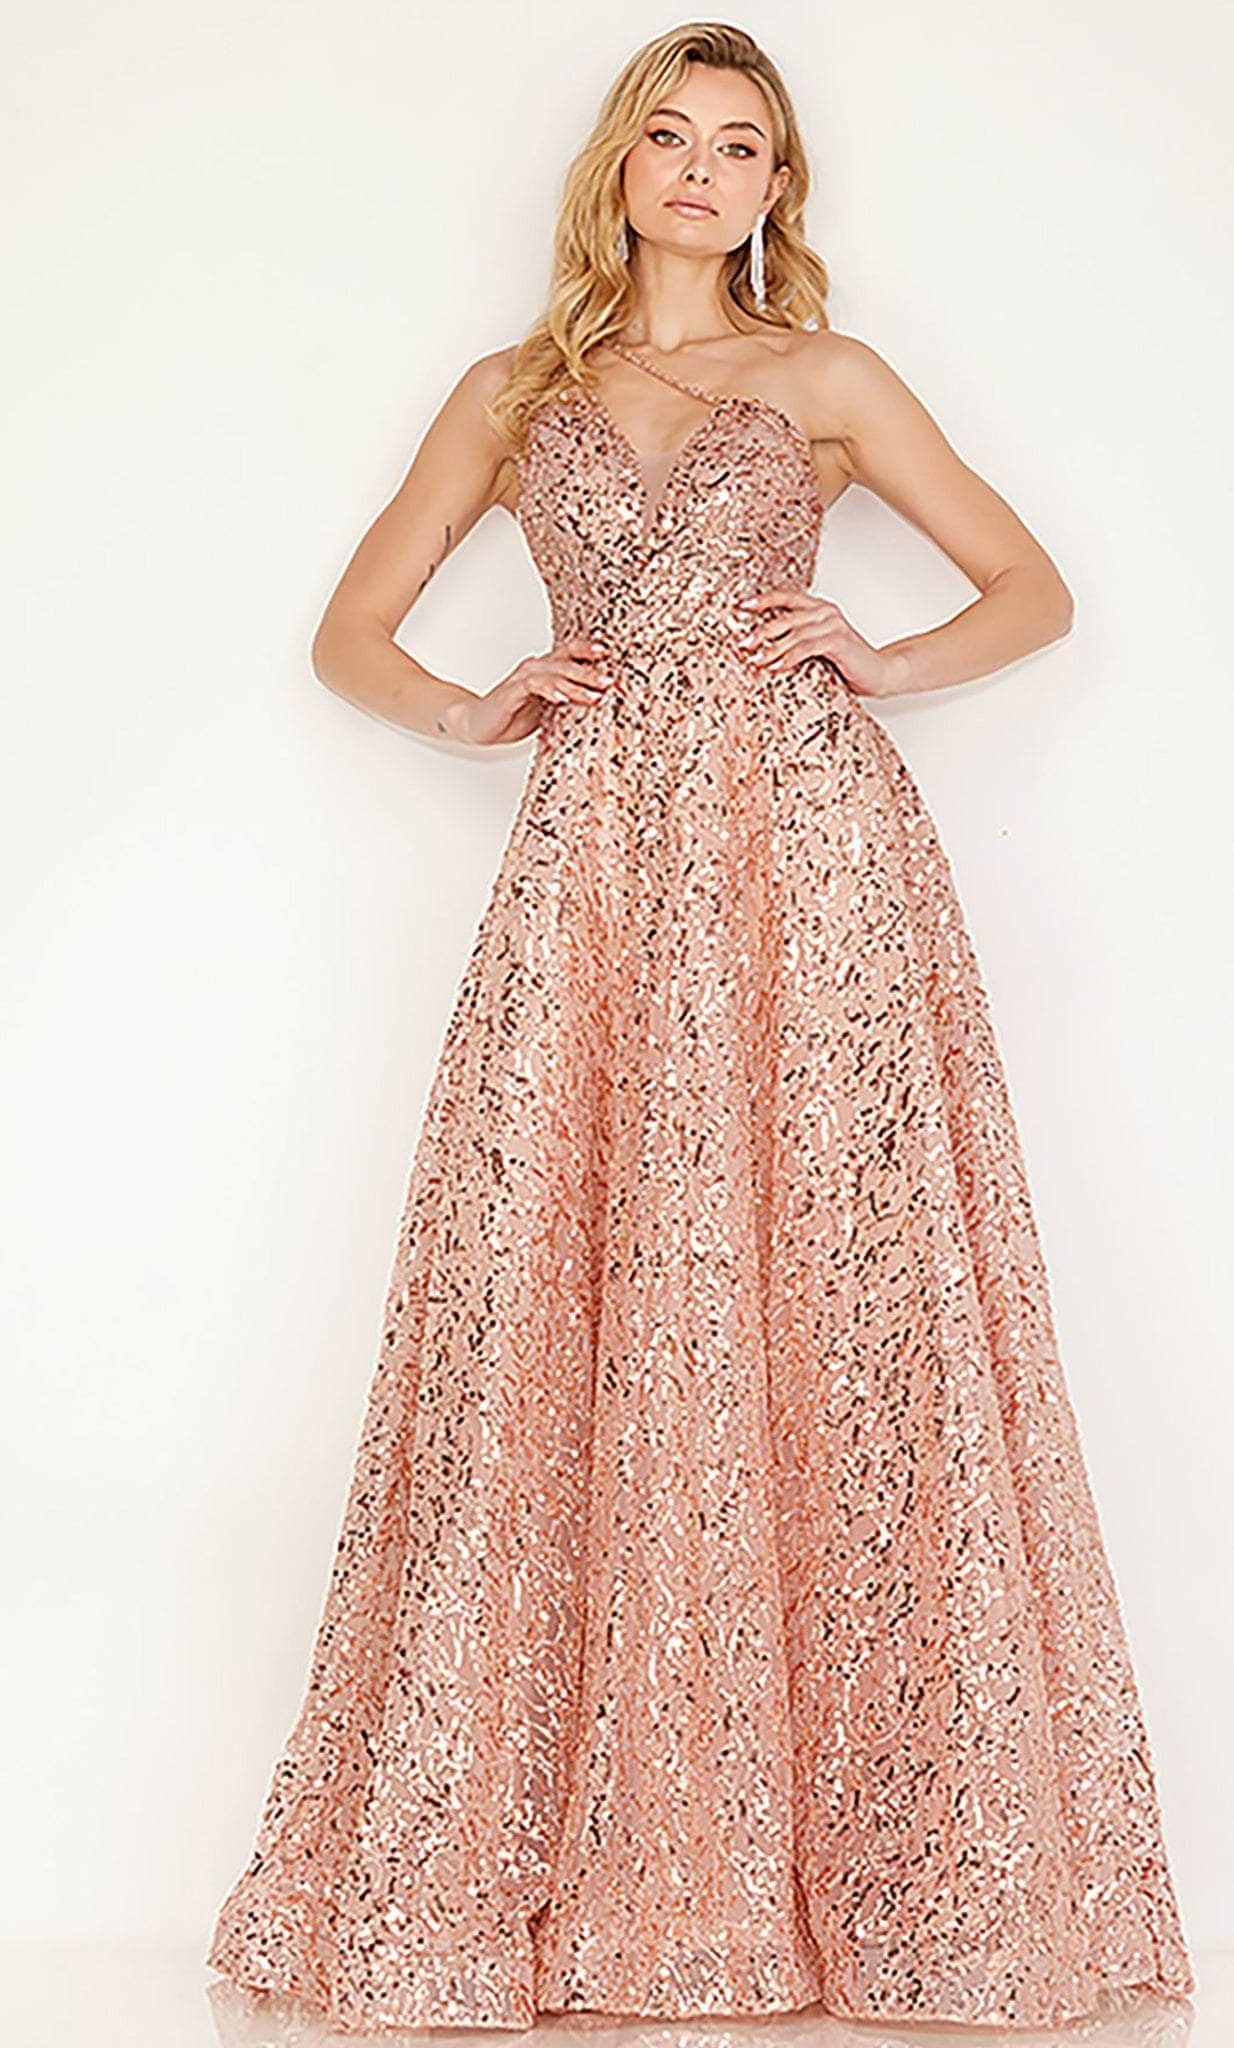 Cecilia Couture 192 - Embellished A-line Evening Gown Prom Dresses 6 / Rose Gold